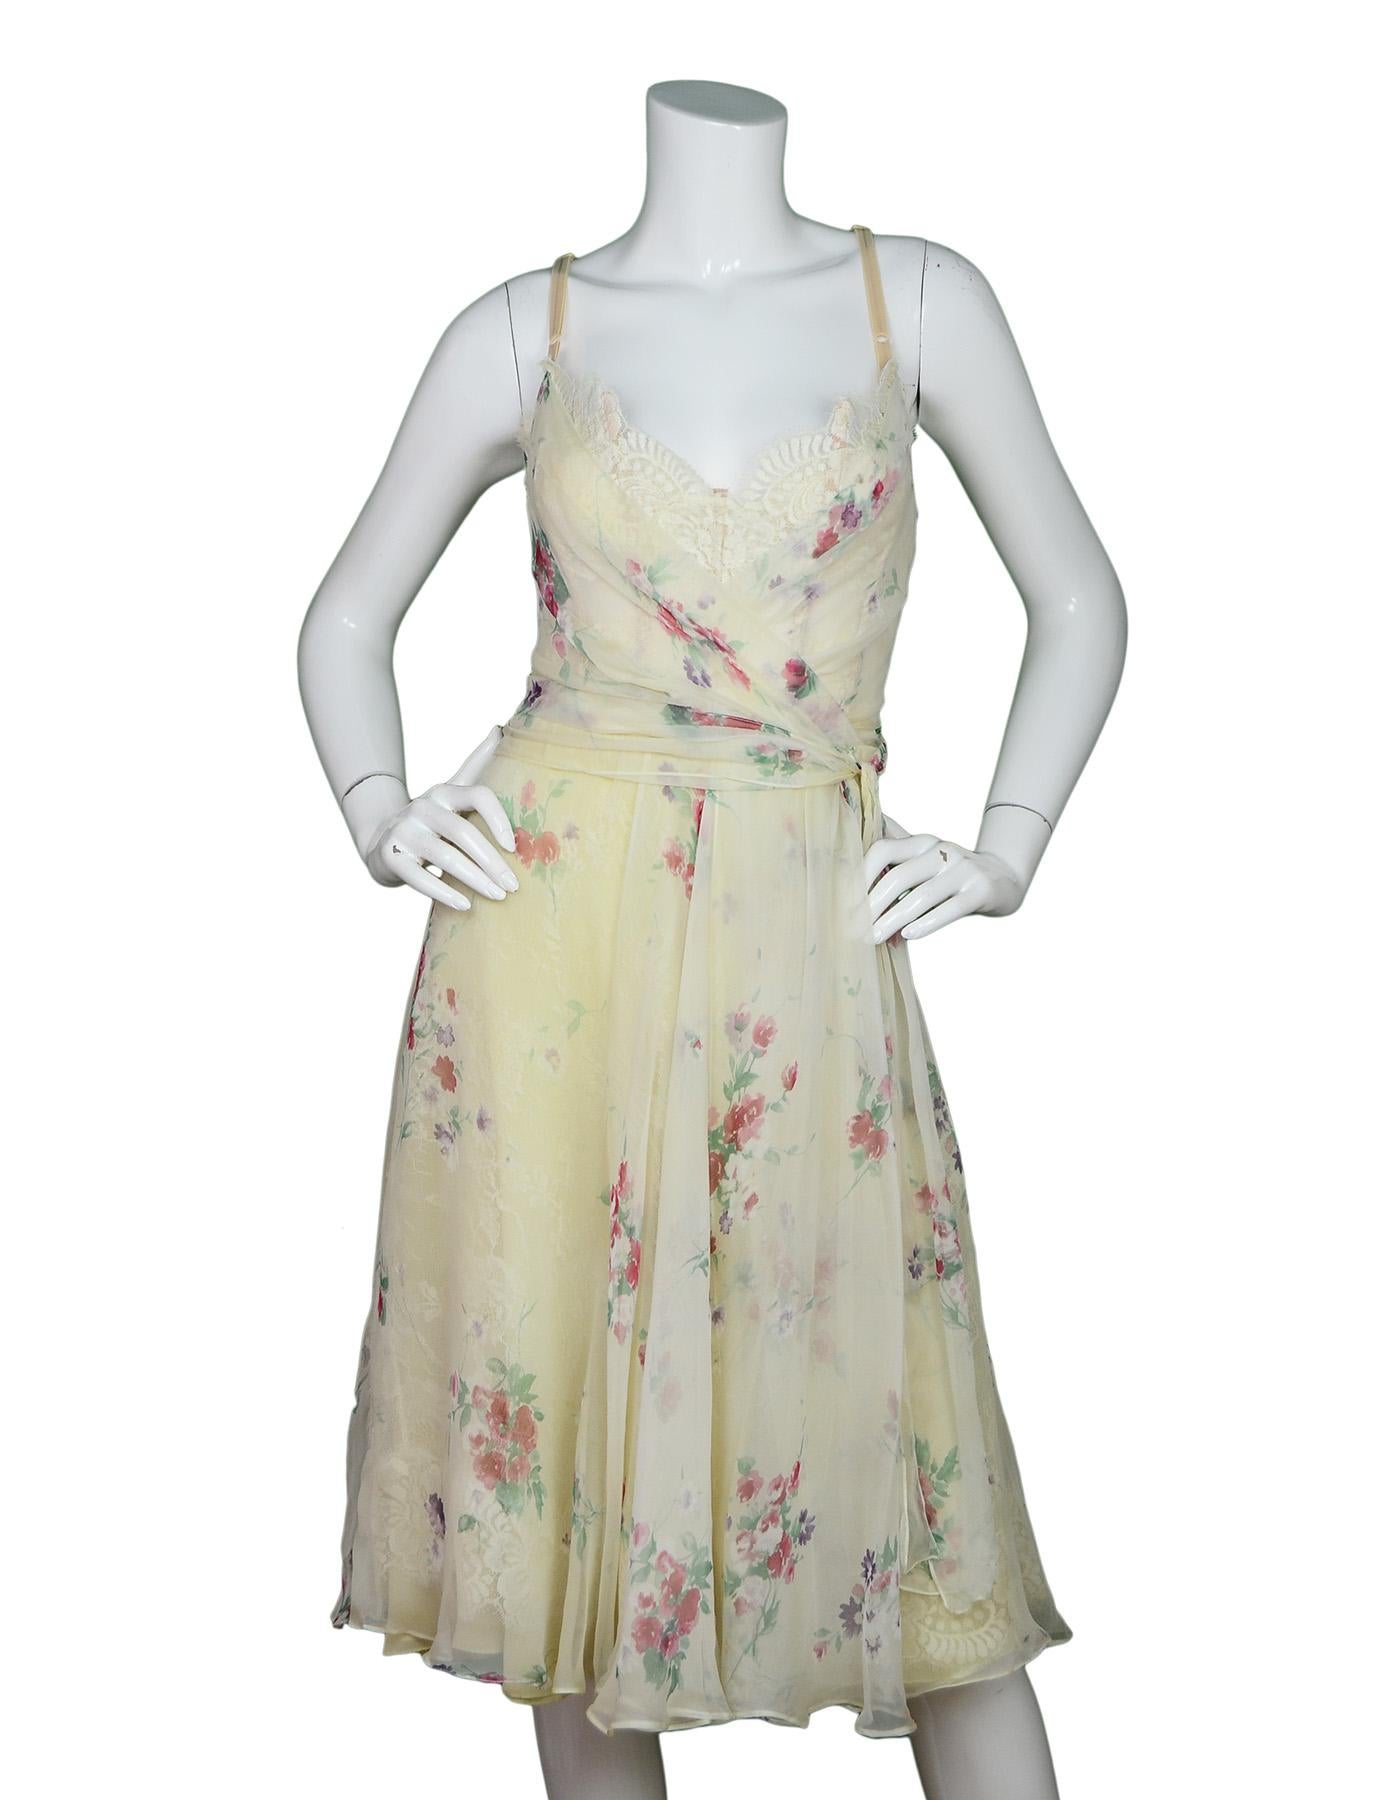 Dolce & Gabbana White Silk Floral Spaghetti Strap Dress W/ Boned Bust Lace Sz 42

Made In: Italy
Color: Ivory/white, pink & green flowers
Materials: 48% silk, 35% rayon, 10% polyester, 4% tactel, 3% nylon
Lining: 100% silk
Opening/Closure: Hidden